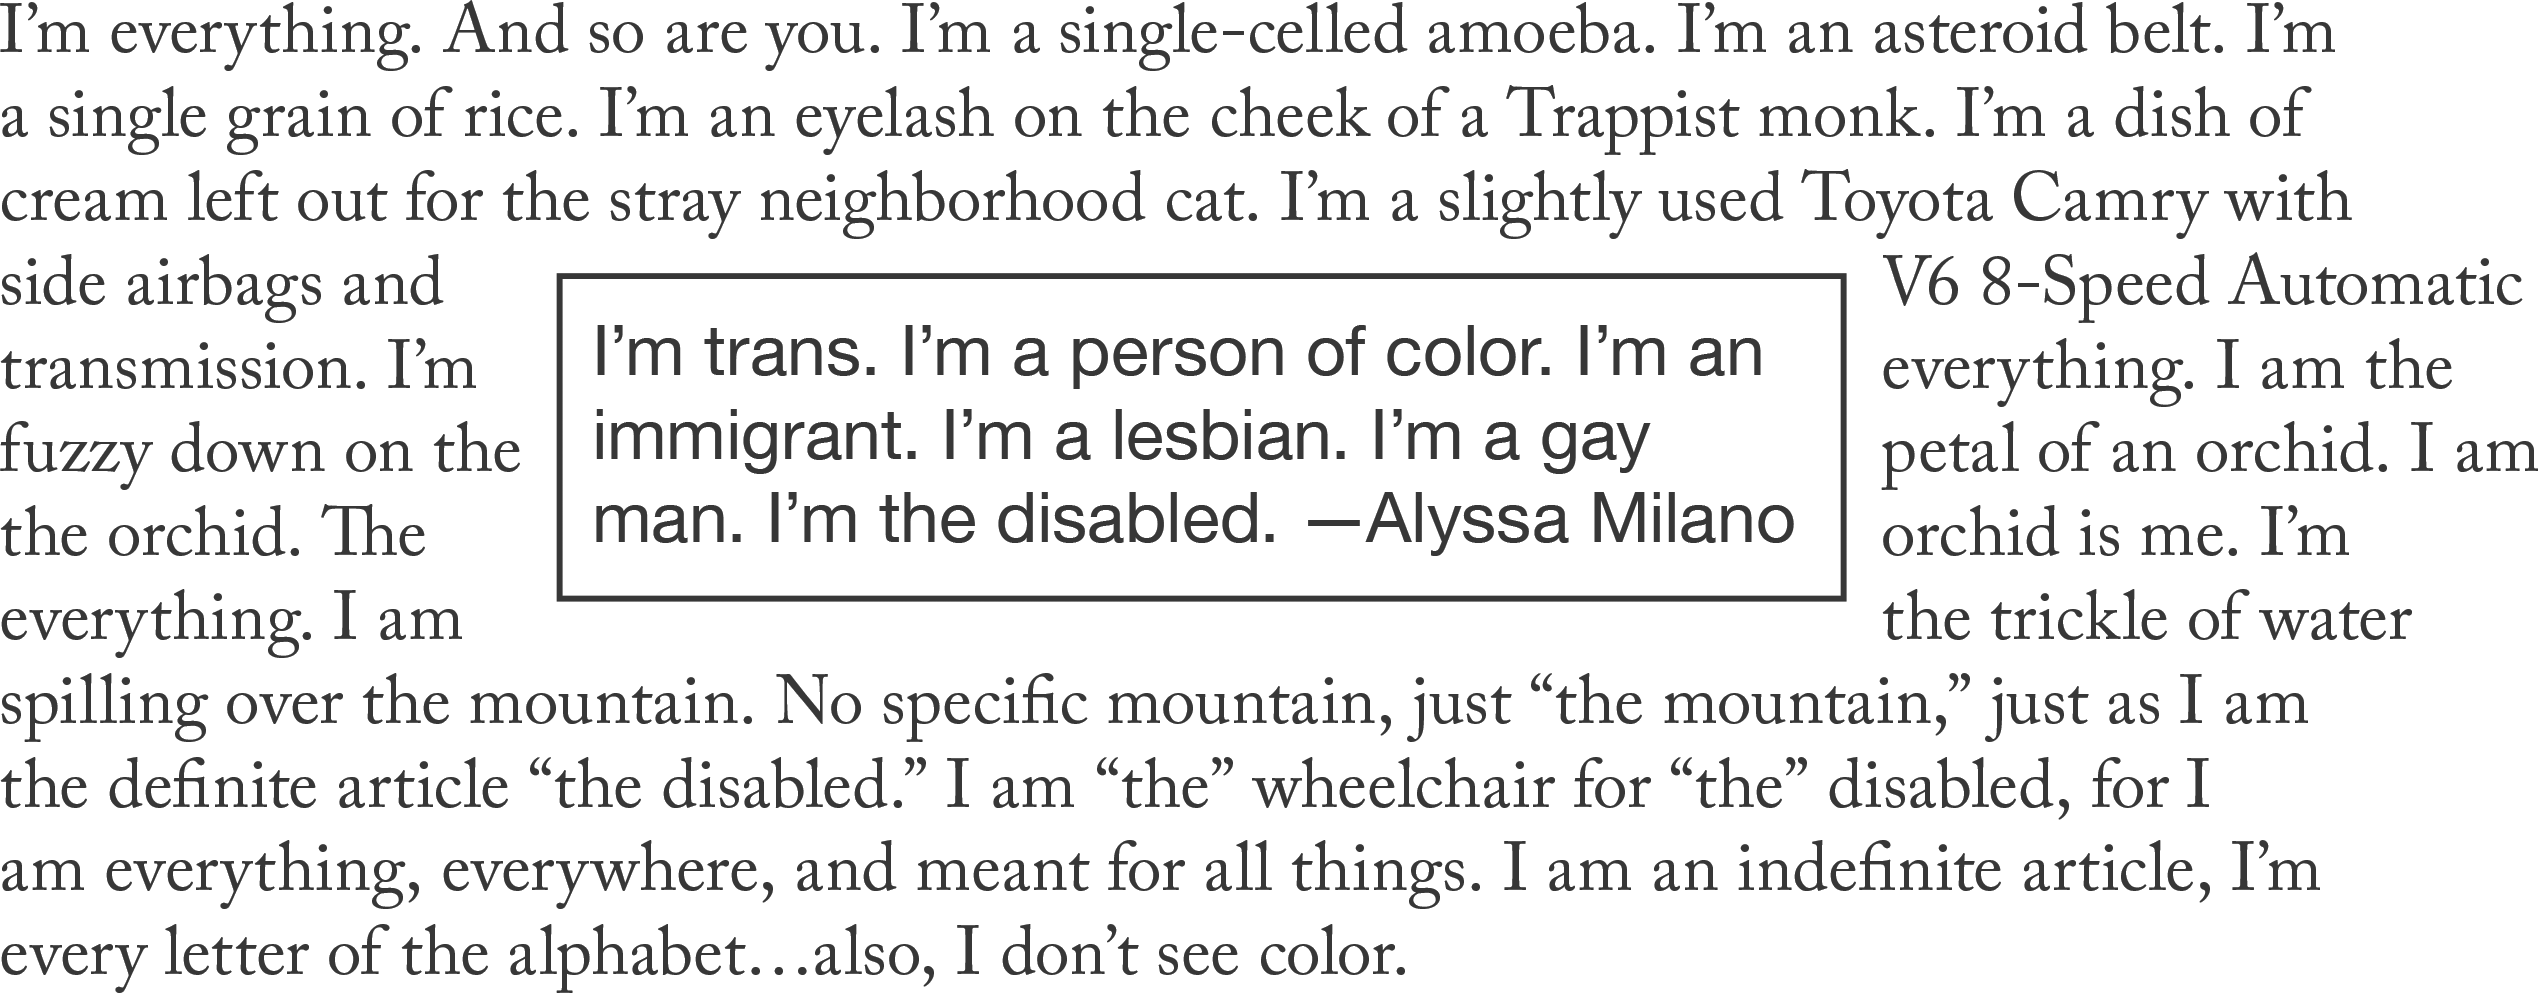 A rectangle in the middle of the page contains a quotation attributed to Alyssa Milano: ‘I’m trans. I’m a person of color. I’m an immigrant. I’m a lesbian. I’m a gay man. I’m the disabled.’ Flowing around that rectangle is a poem: ‘I’m everything. And so are you. I’m a single-celled amoeba. I’m an asteroid belt. I’m a single grain of rice. I’m an eyelash on the cheek of a Trappist monk. I’m a dish of cream left out for the stray neighborhood cat. I’m a slightly used Toyota Camry with side airbags and V6 8-Speed Automatic transmission. I’m everything. I am the fuzzy down on the petal of an orchid. I am the orchid. The orchid is me. I’m everything. I am the trickle of water spilling over the mountain. No specific mountain, just “the mountain,” just as I am the definite article “the disabled.” I am “the” wheelchair for “the” disabled, for I am everything, everywhere, and meant for all things. I am an indefinite article, I’m every letter of the alphabet…also, I don’t see color.’